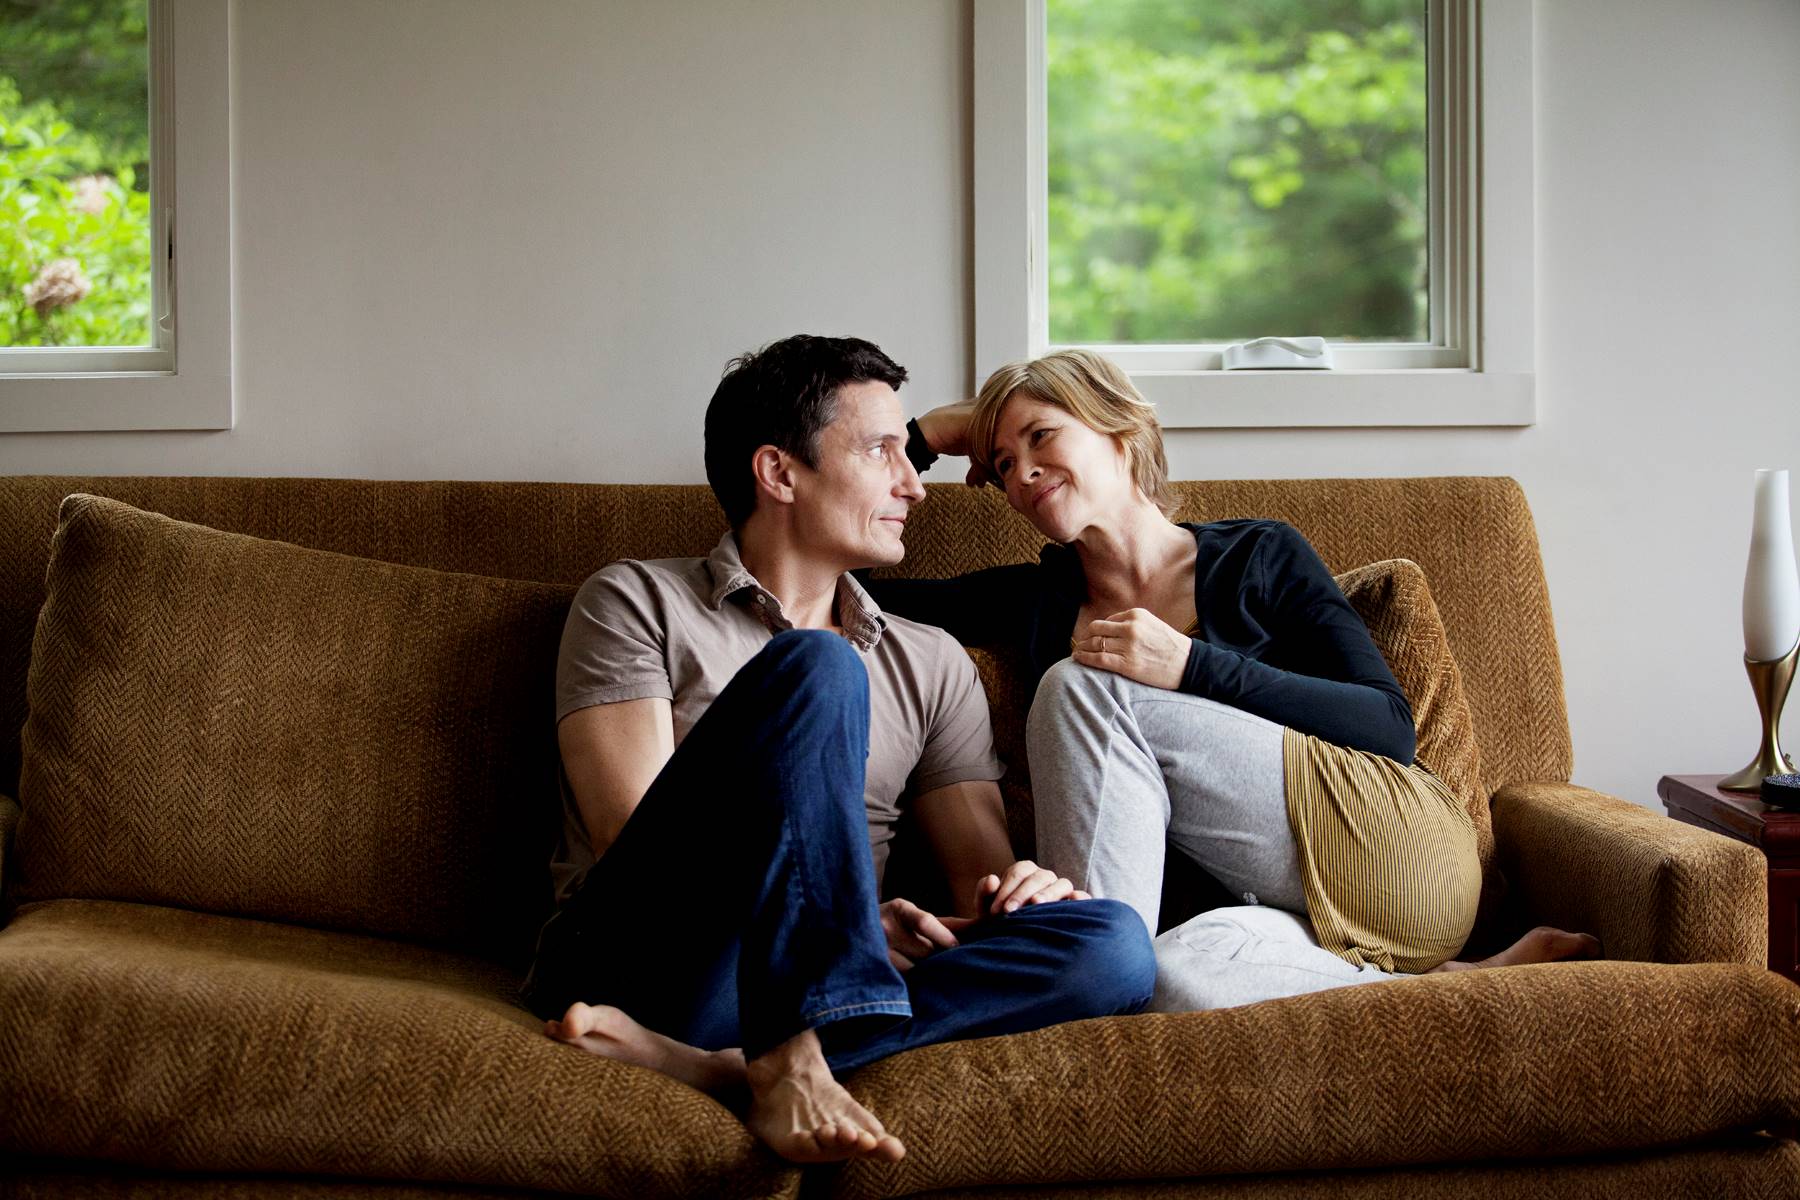 The Ultimate Guide To Winning Back Your Spouse After They’ve Been With Someone Else